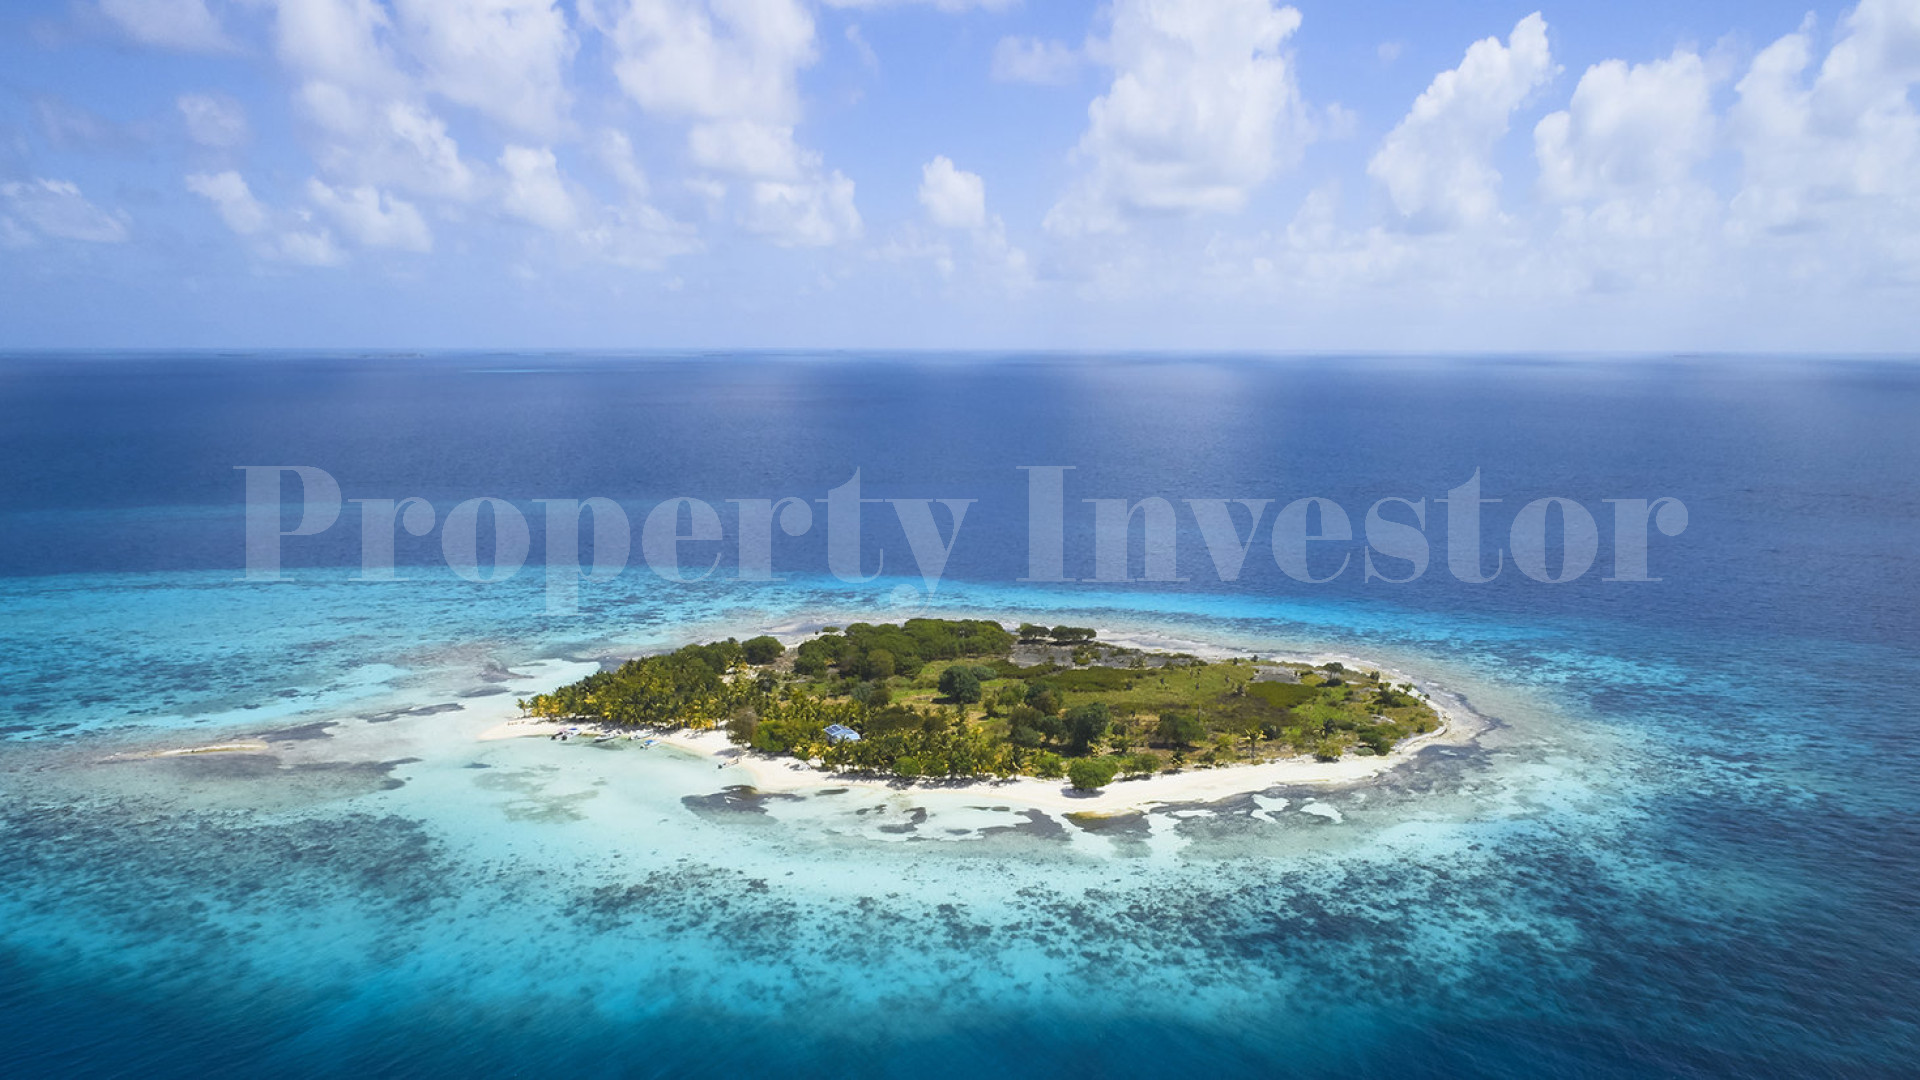 Stunningly Beautiful 3.4 Hectare Private Virgin Island for Sale Near Placencia Village, Belize